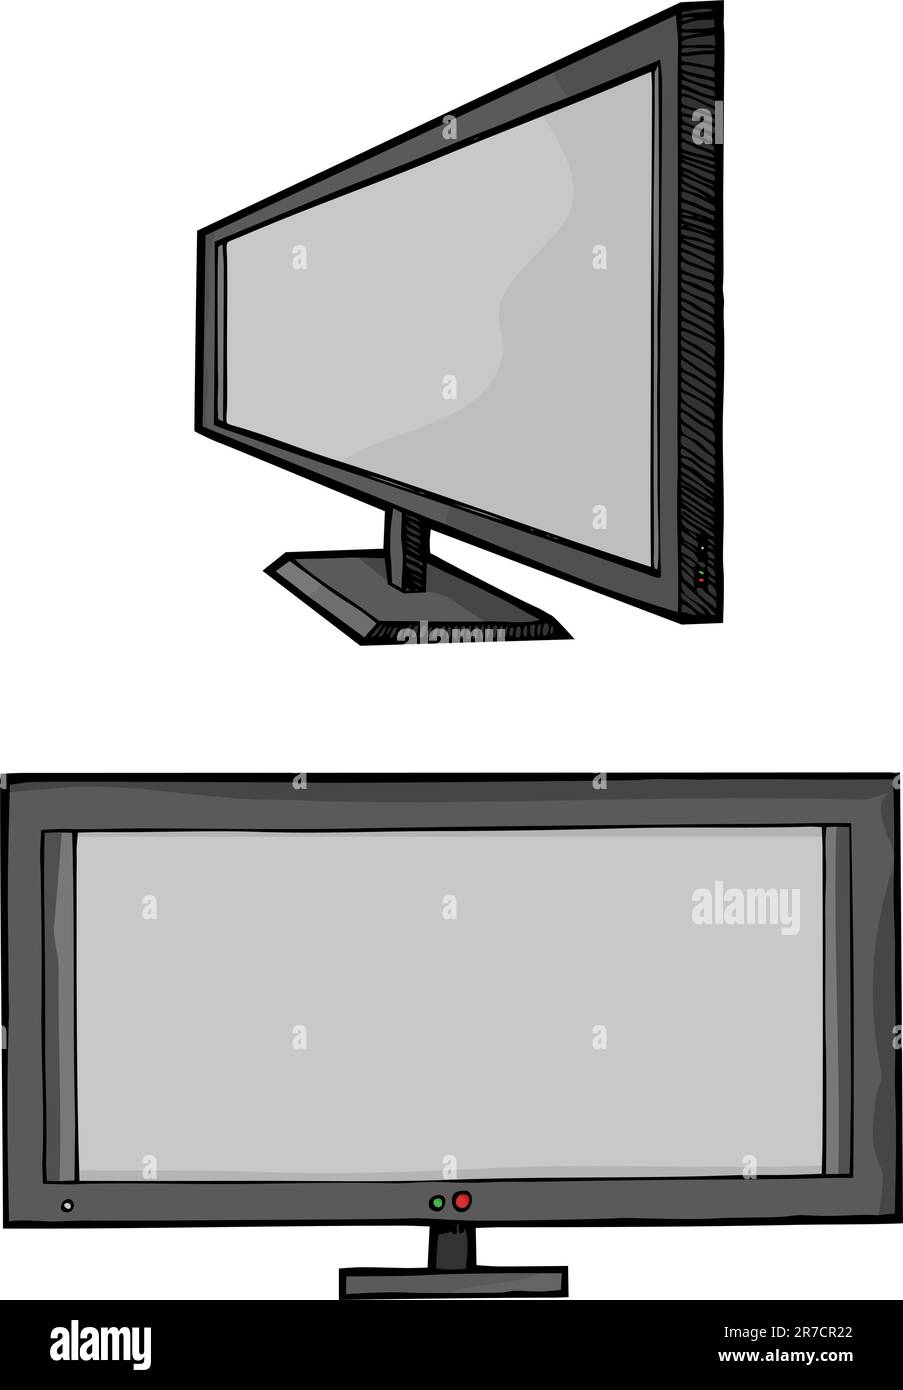 Isolated cartoon of a wide screen flat panel HD television monitor Stock Vector